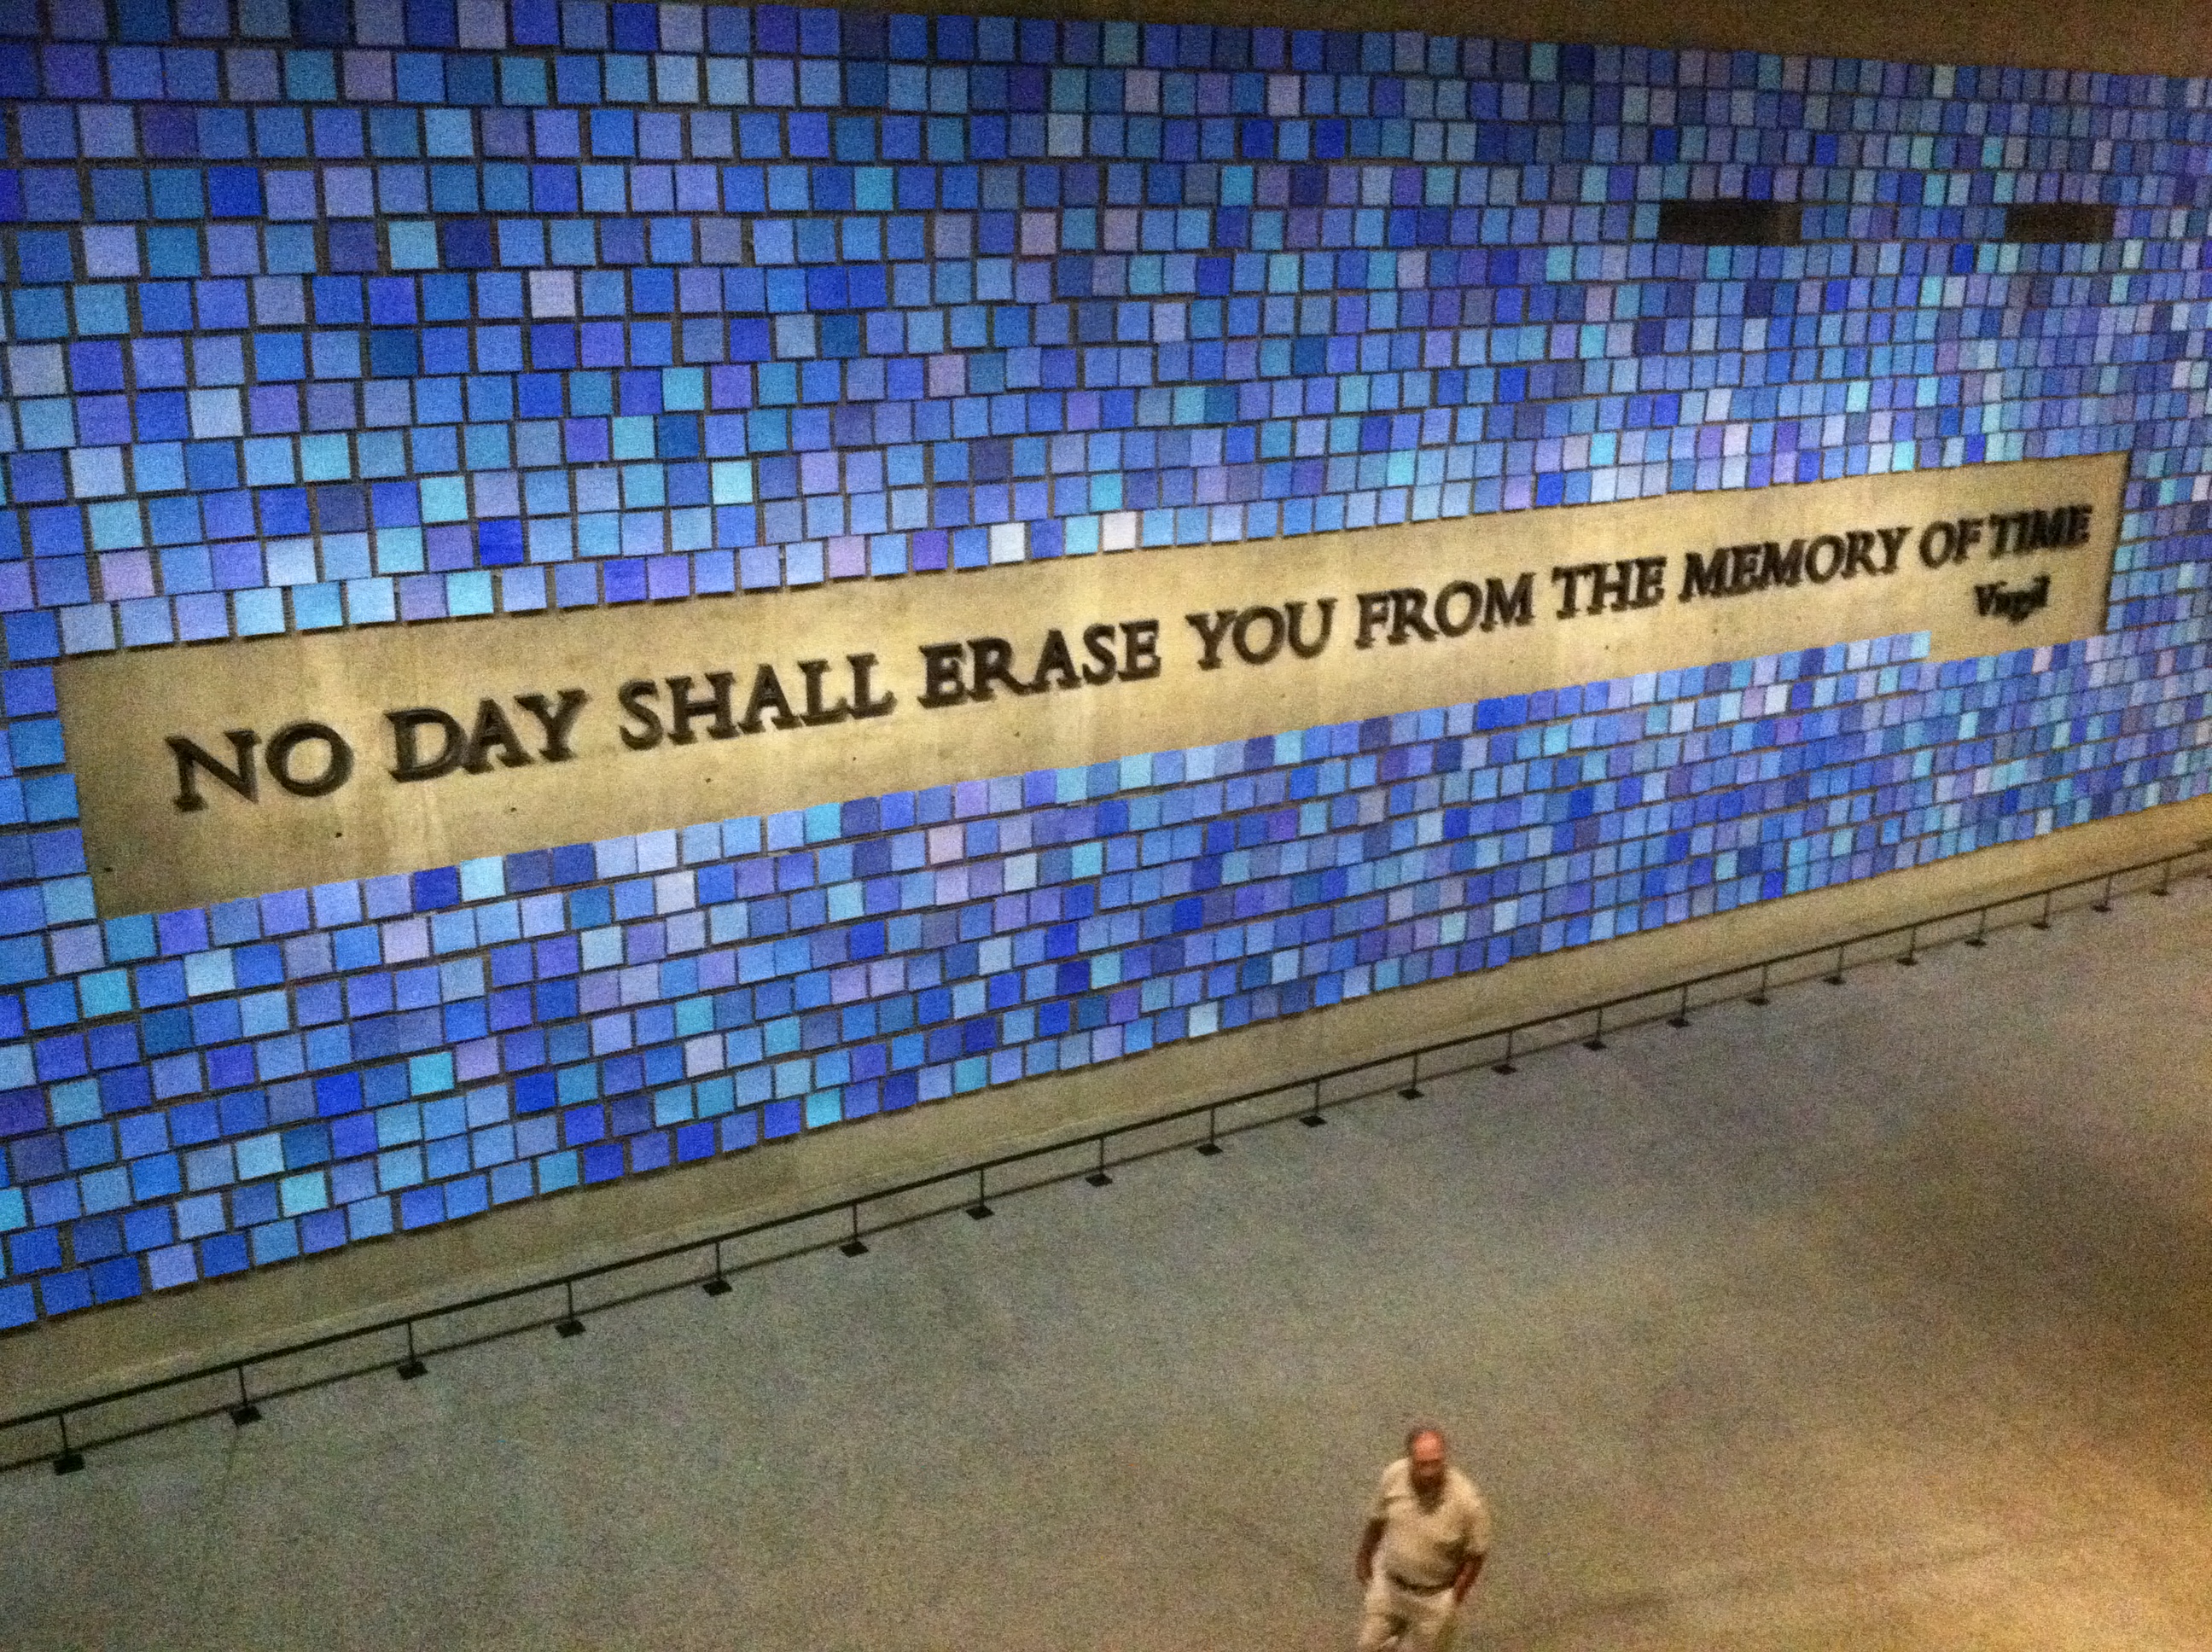 A quote by Virgil inscribed on the wall a the Natinoal September 11 Memorial and Museum